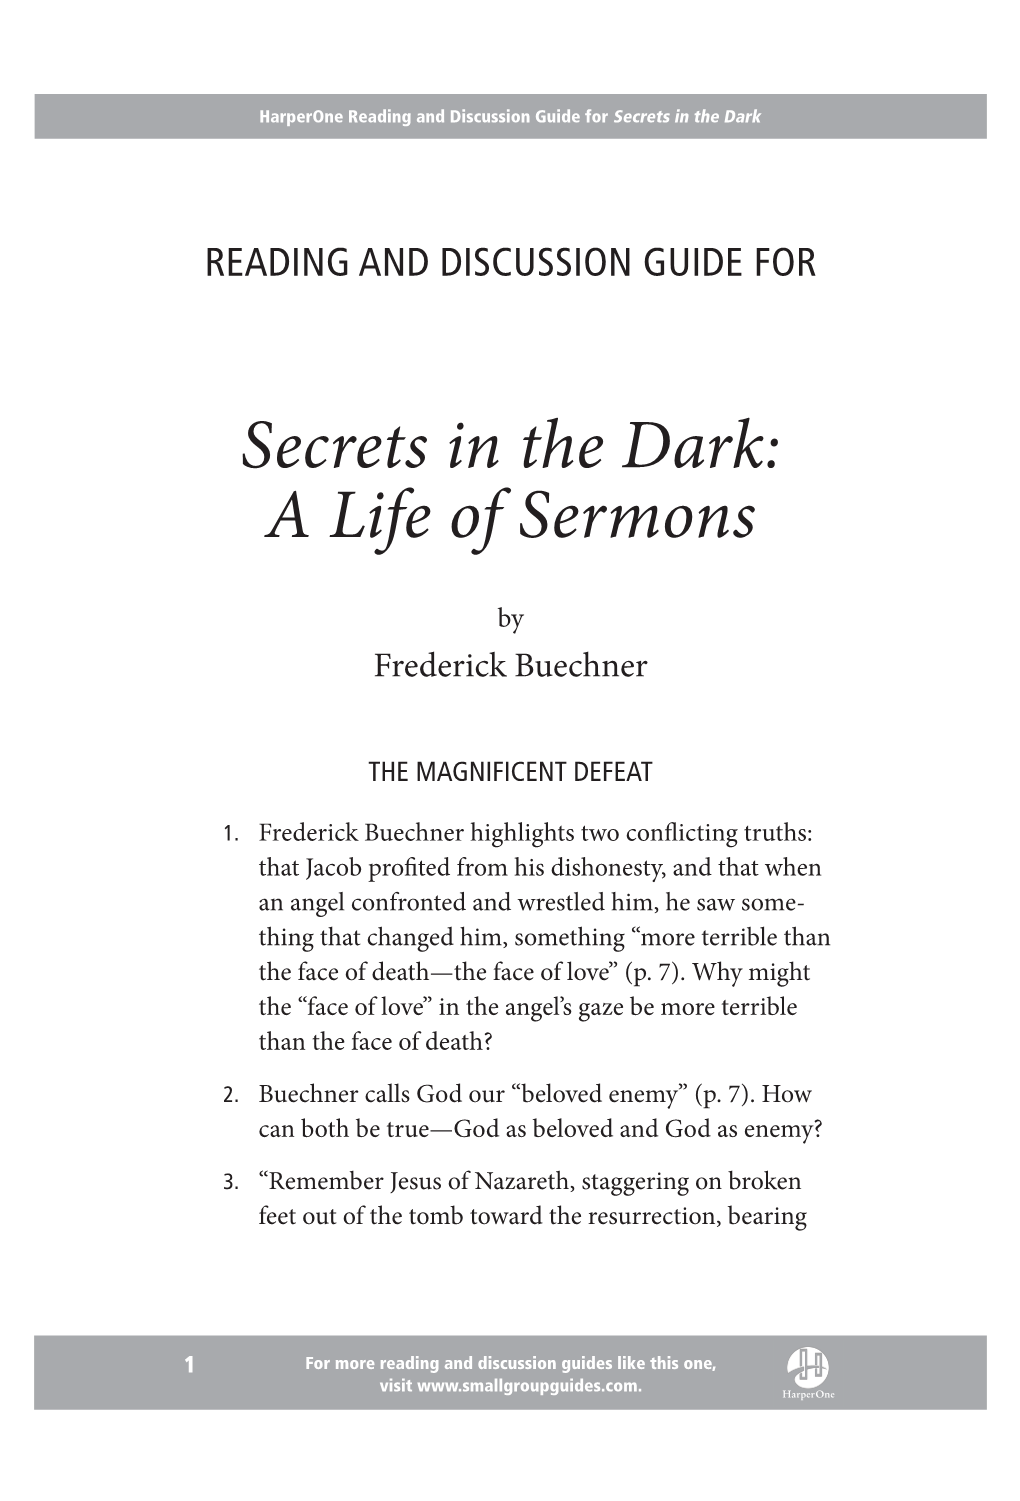 Secrets in the Dark: a Life of Sermons